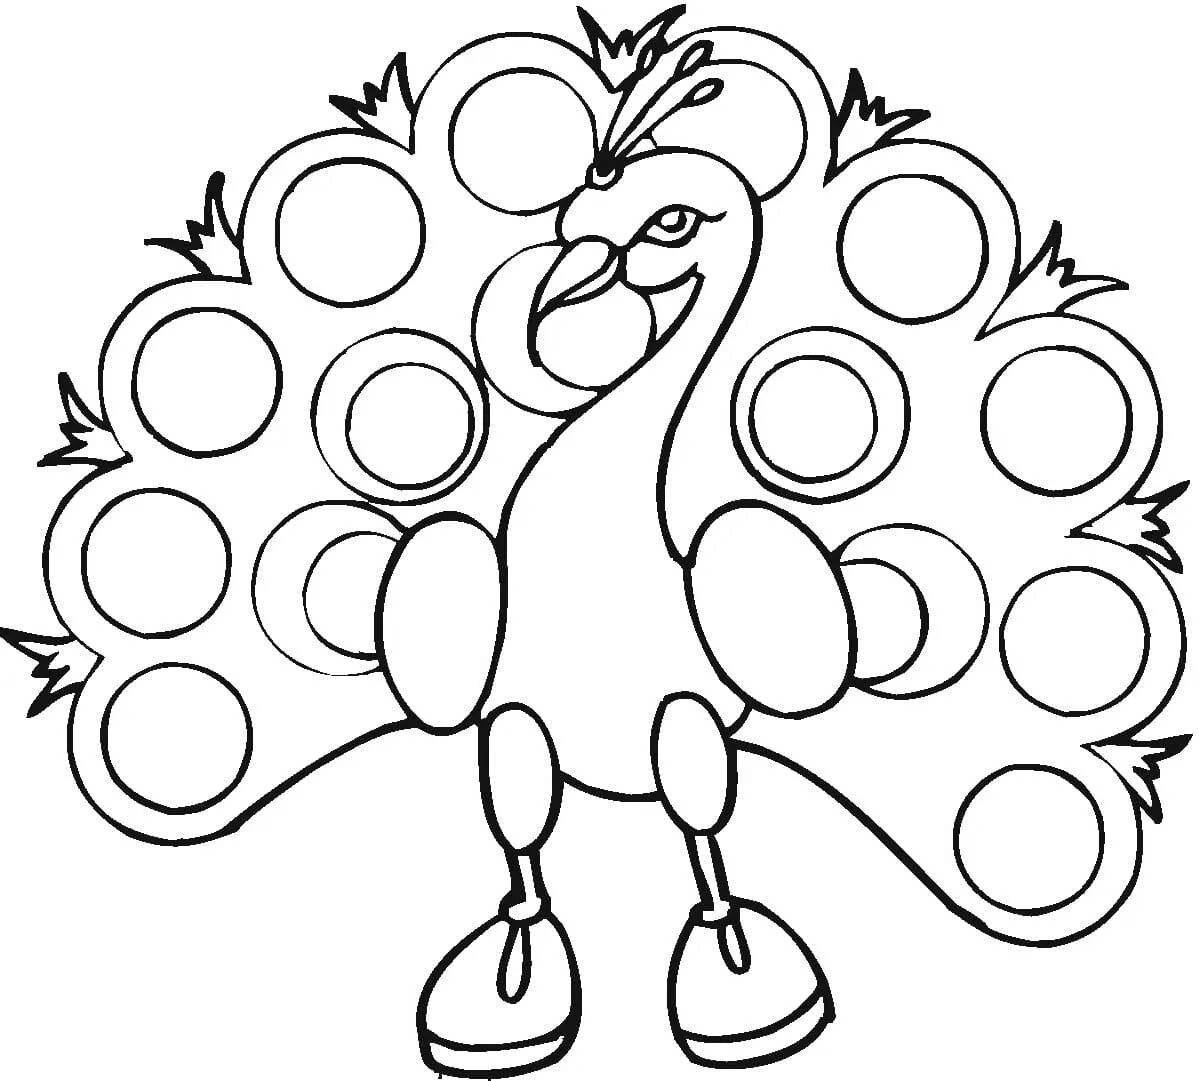 Fun paints 6-7 years coloring page